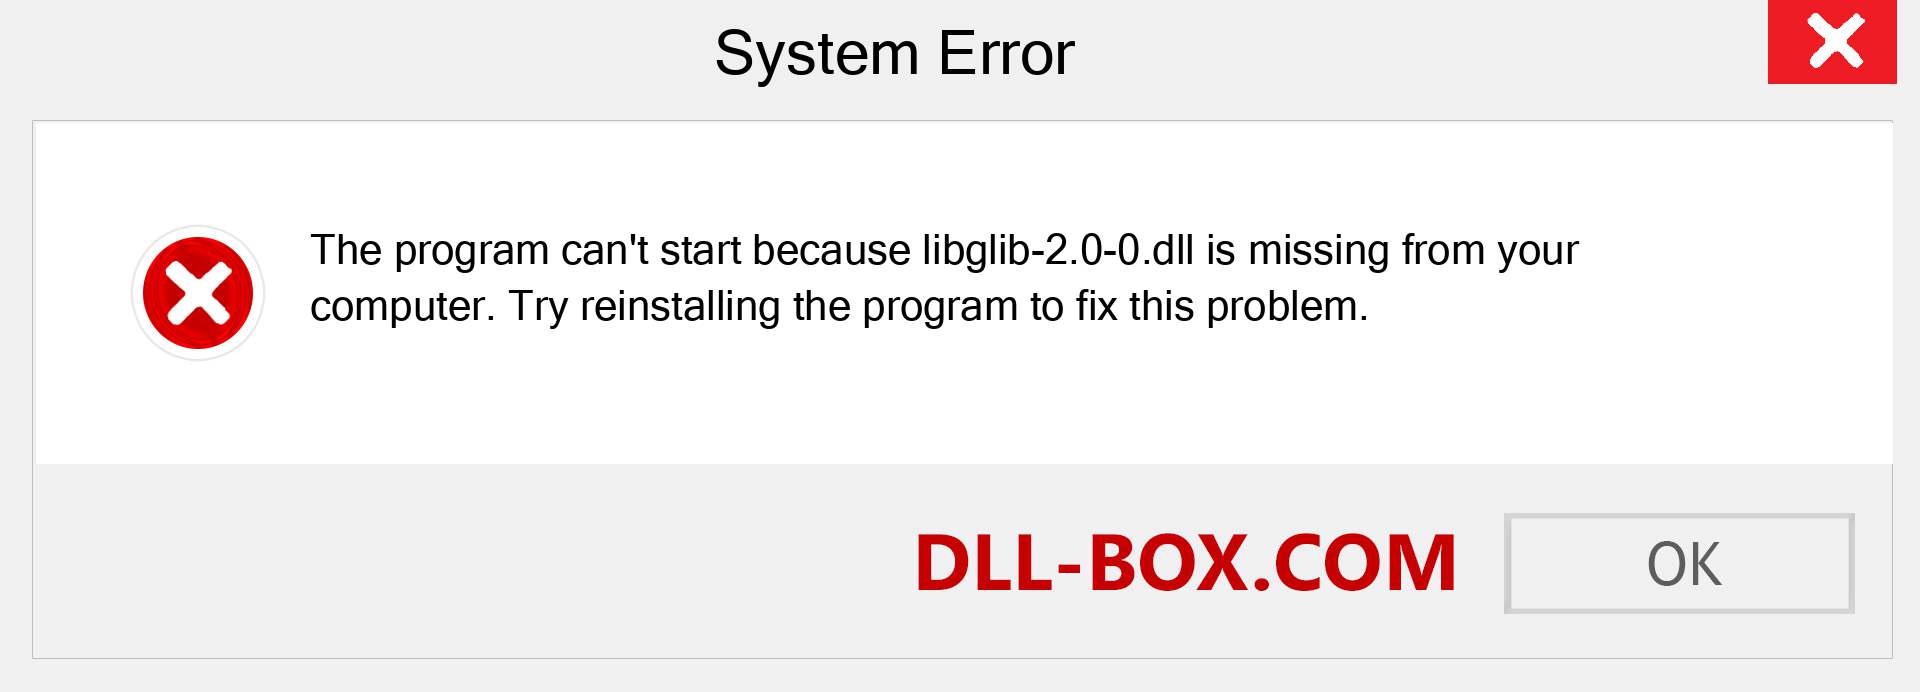  libglib-2.0-0.dll file is missing?. Download for Windows 7, 8, 10 - Fix  libglib-2.0-0 dll Missing Error on Windows, photos, images